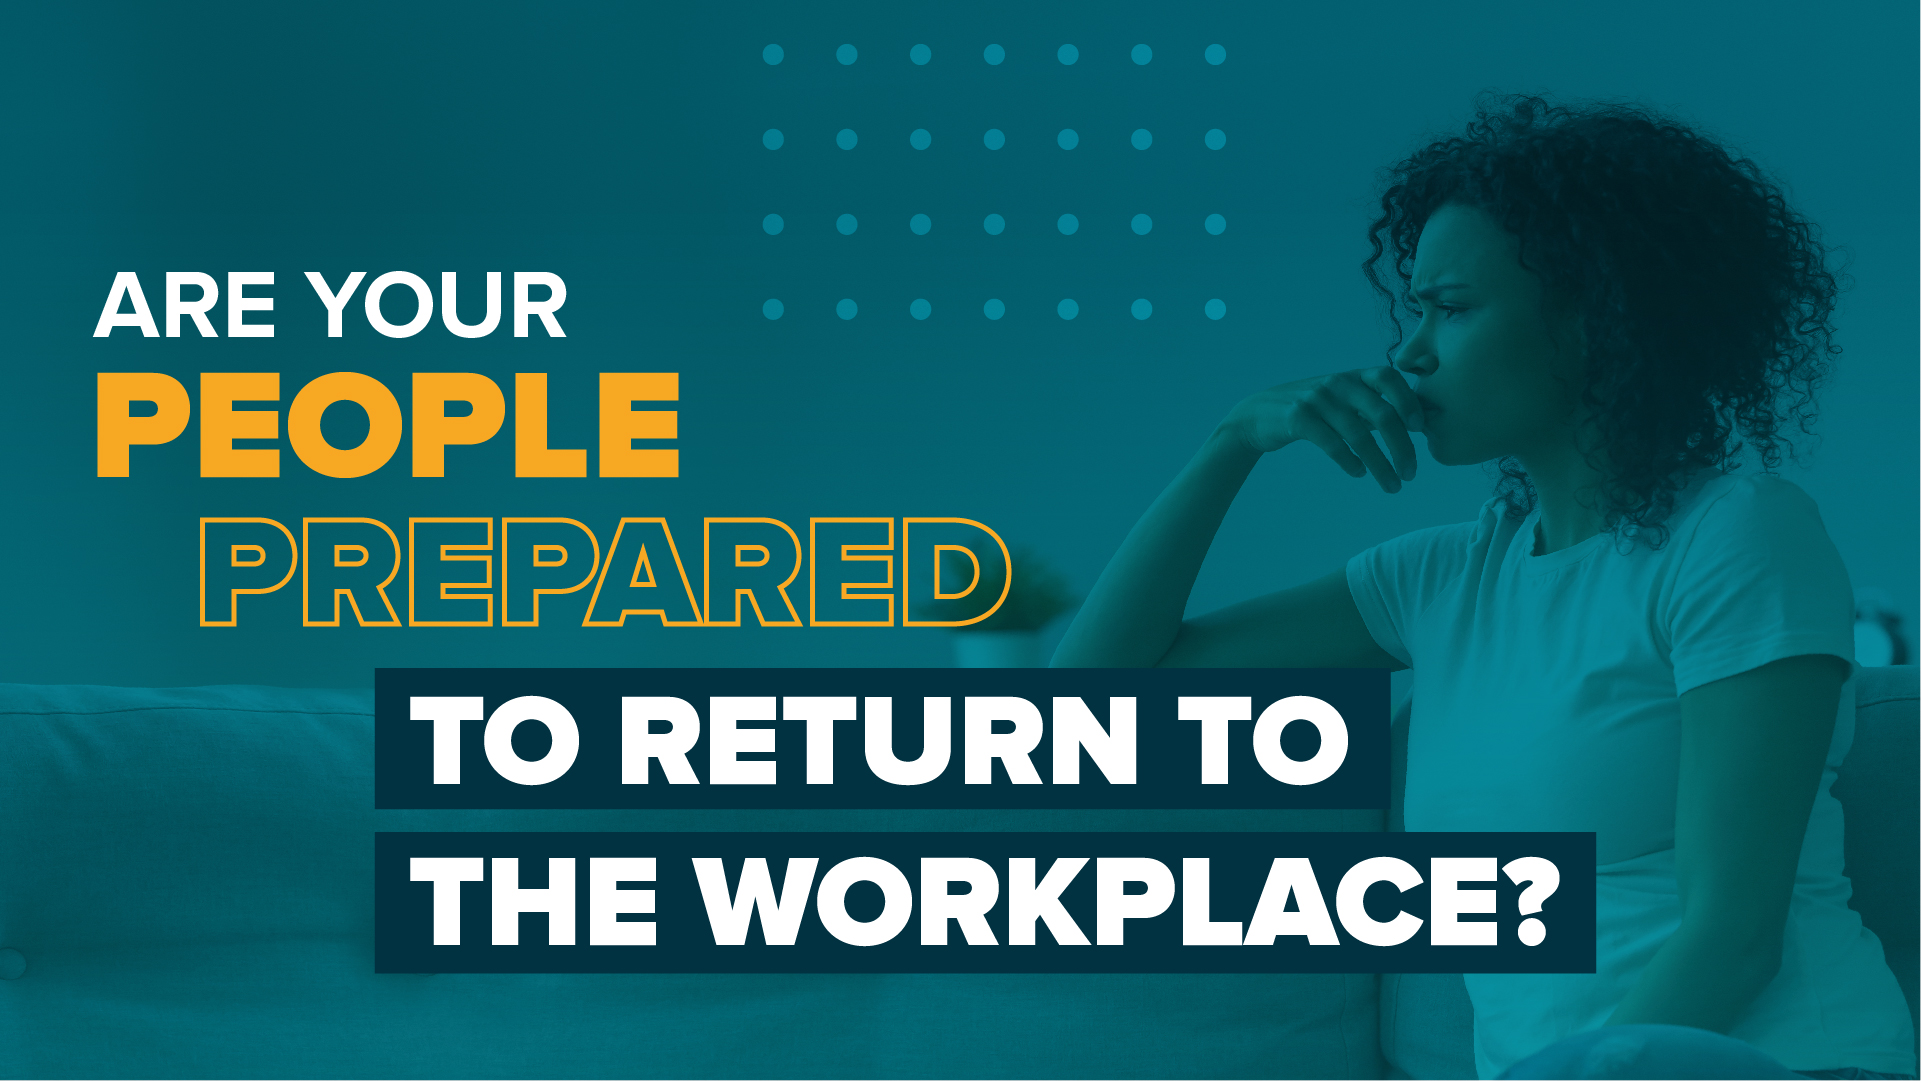 Are Your People Prepared To Return To The Workplace?